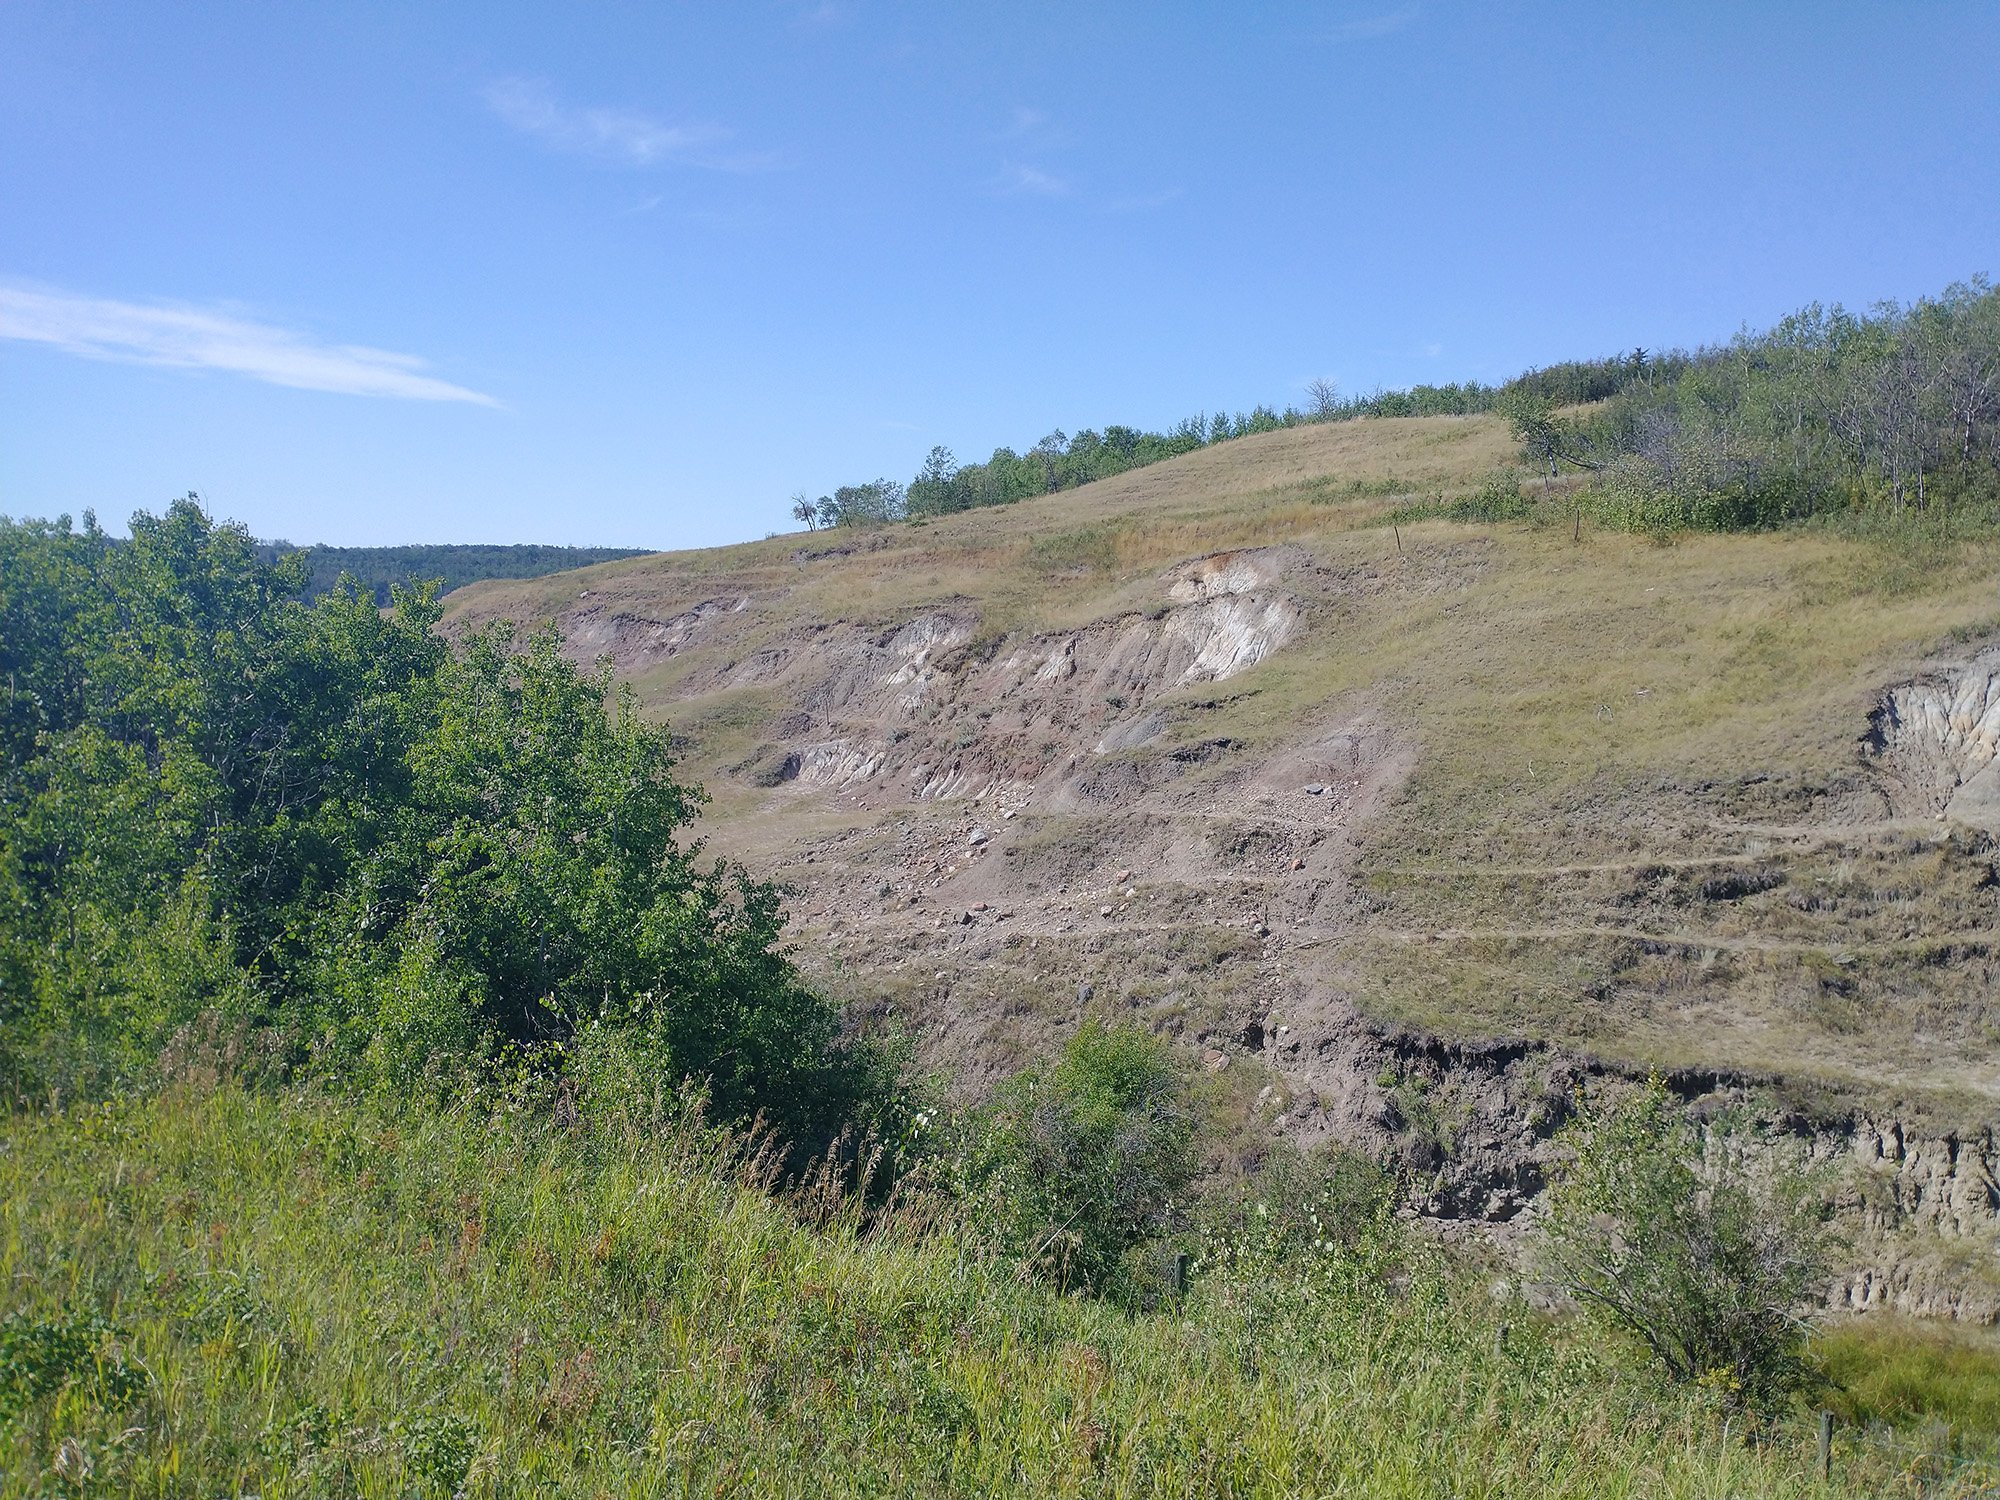 Tiny bit of Badland-ness. Yeah this ain't no Drumheller.